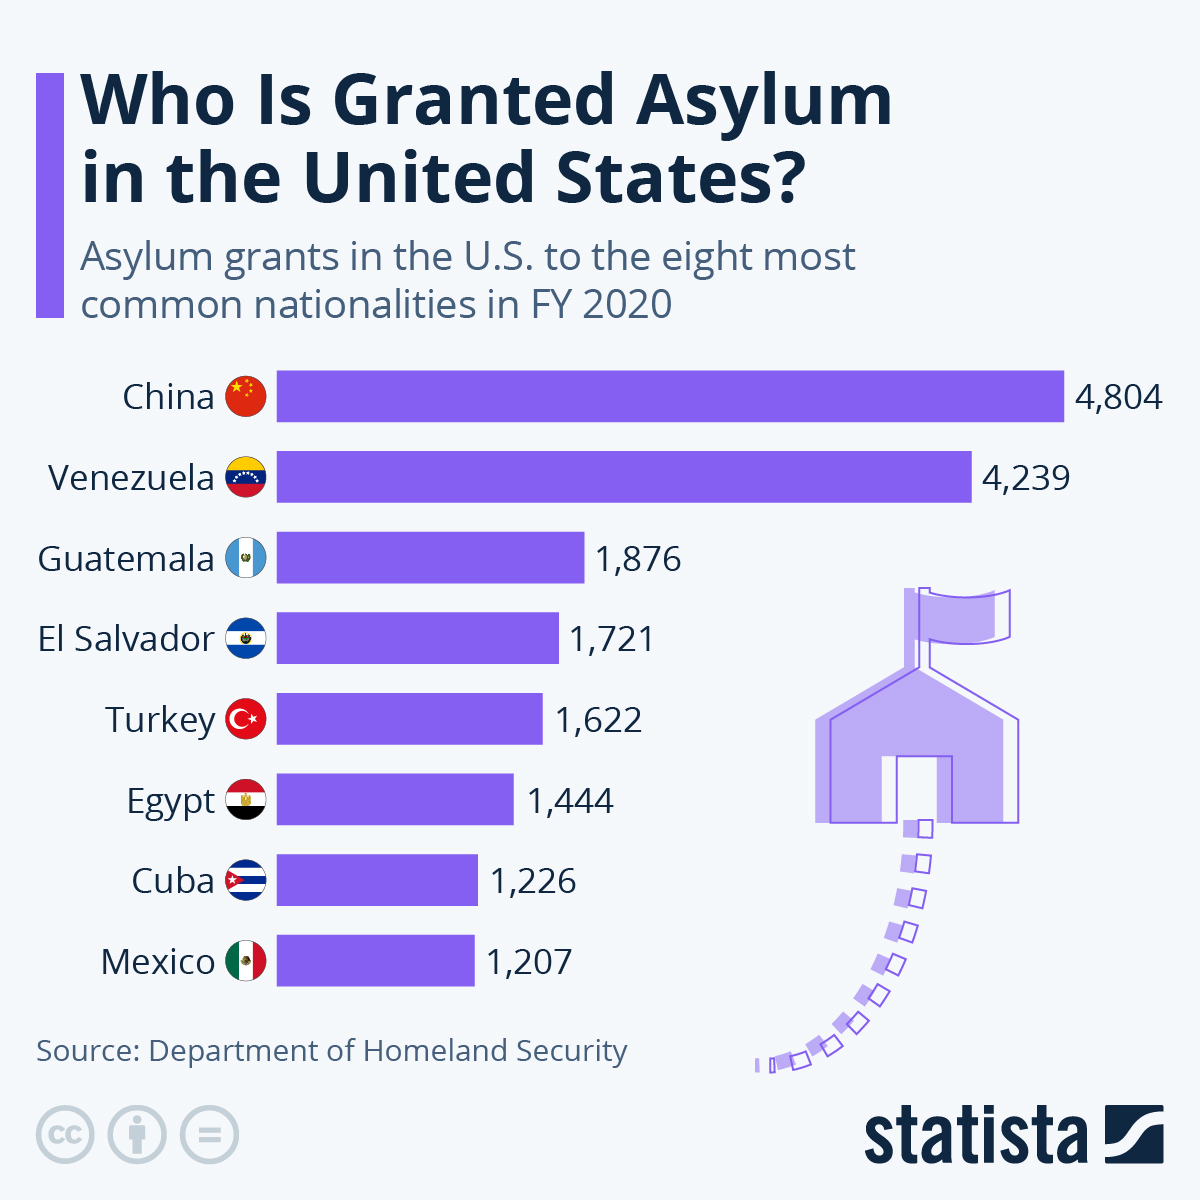 Who Is Granted Asylum in the United States?